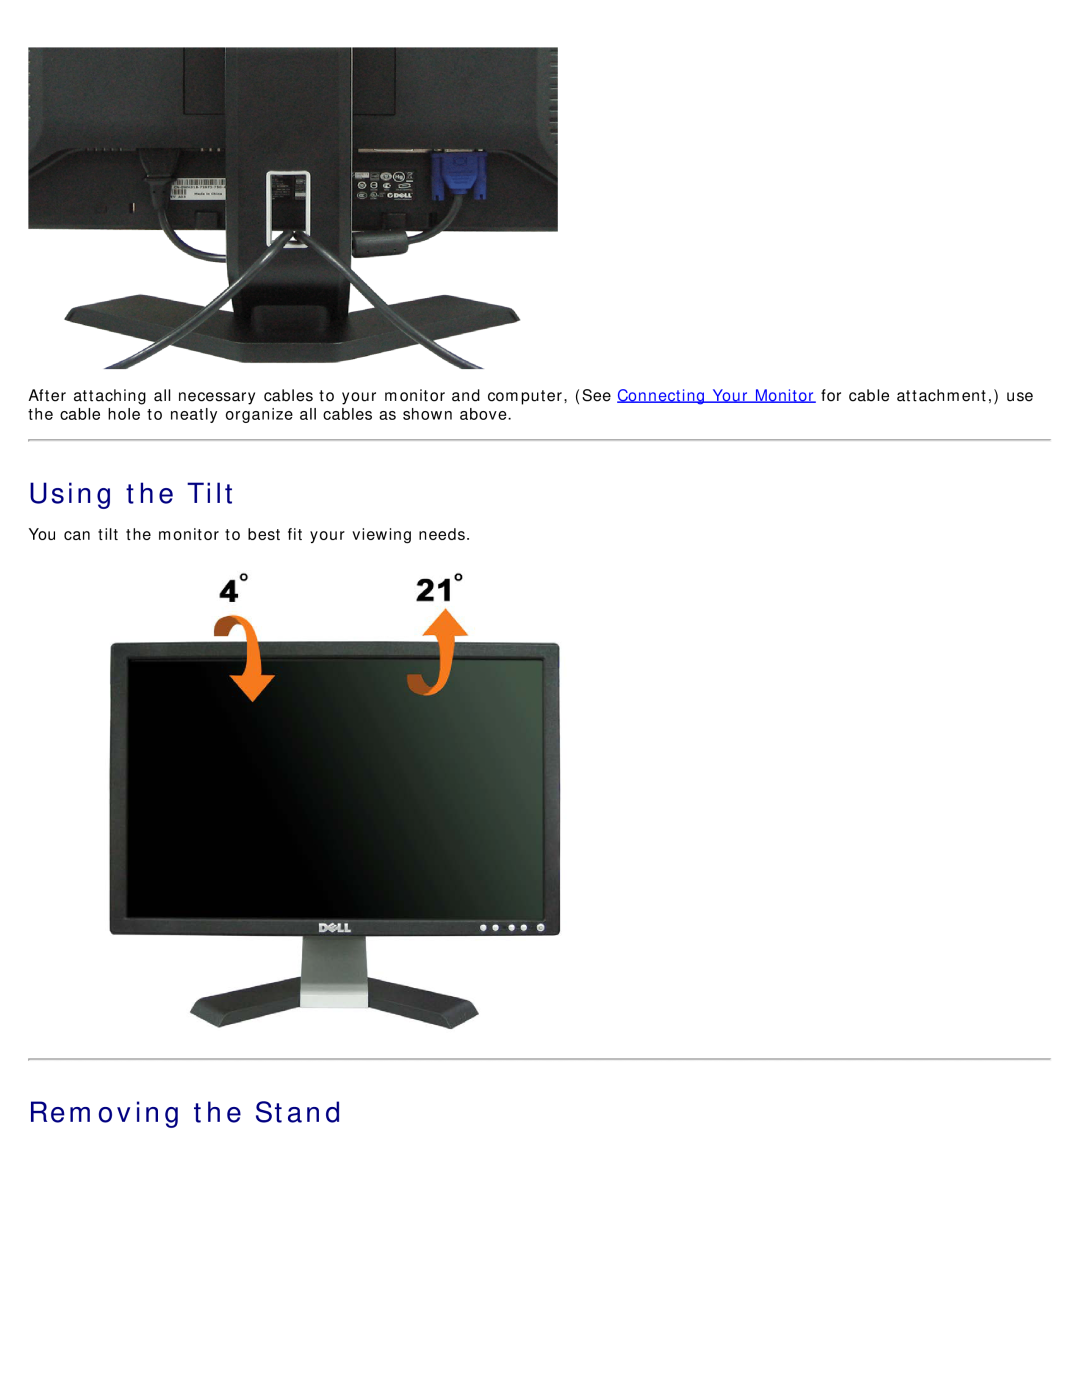 Dell E198WFP appendix Using the Tilt, Removing the Stand, You can tilt the monitor to best fit your viewing needs 